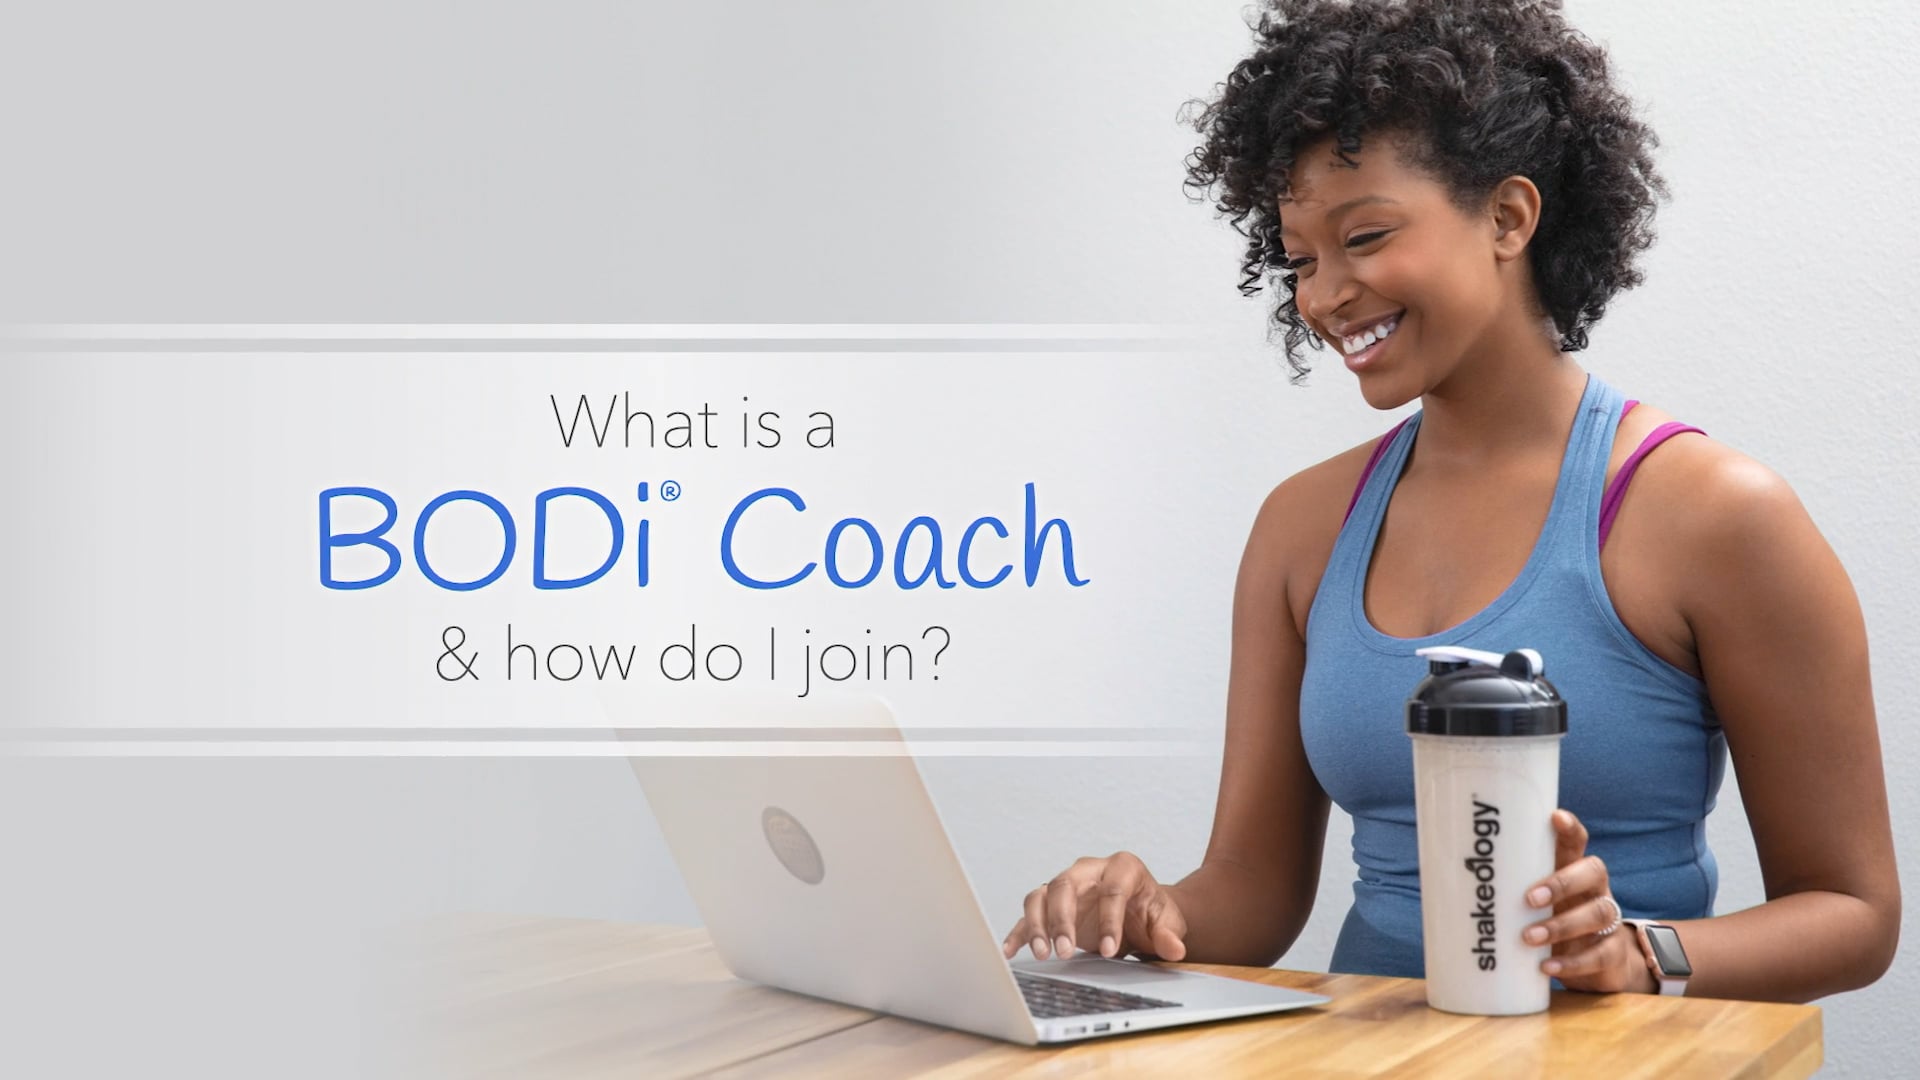 What is a BODi Coach on Vimeo